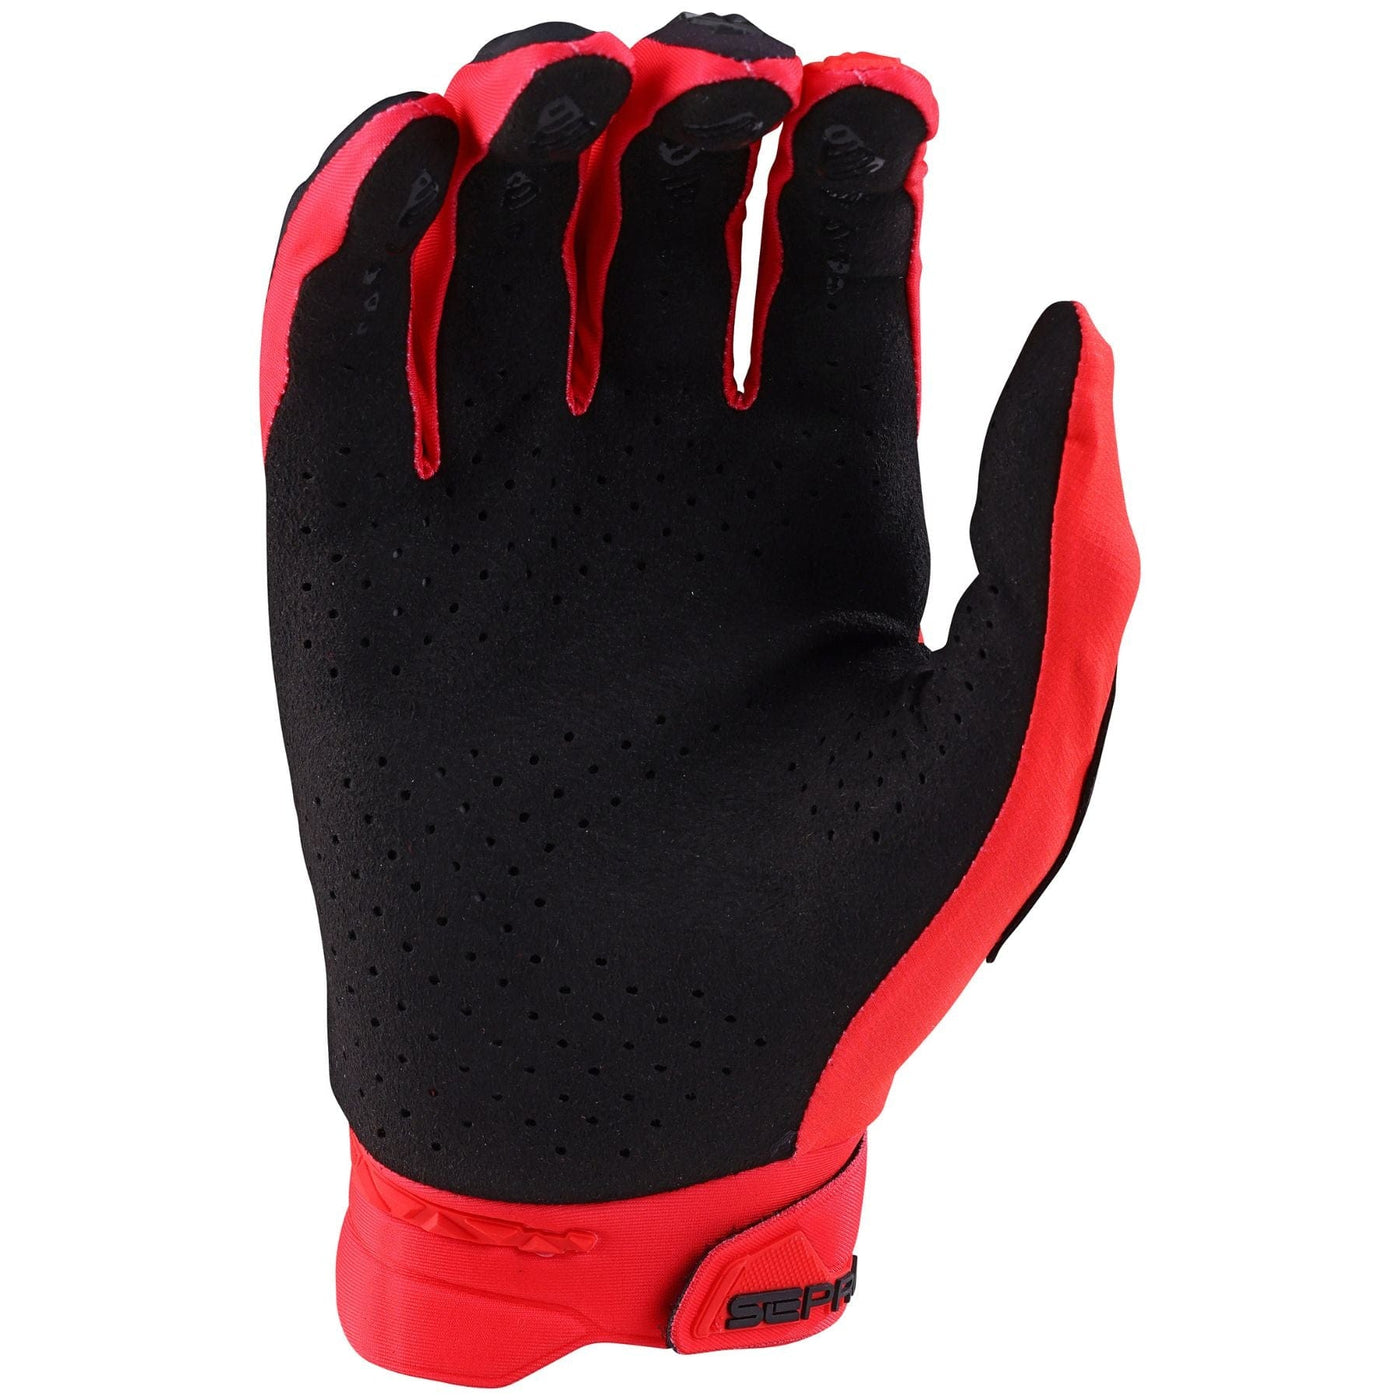 Troy Lee Designs Gloves SE Pro - Glo Red 8Lines Shop - Fast Shipping